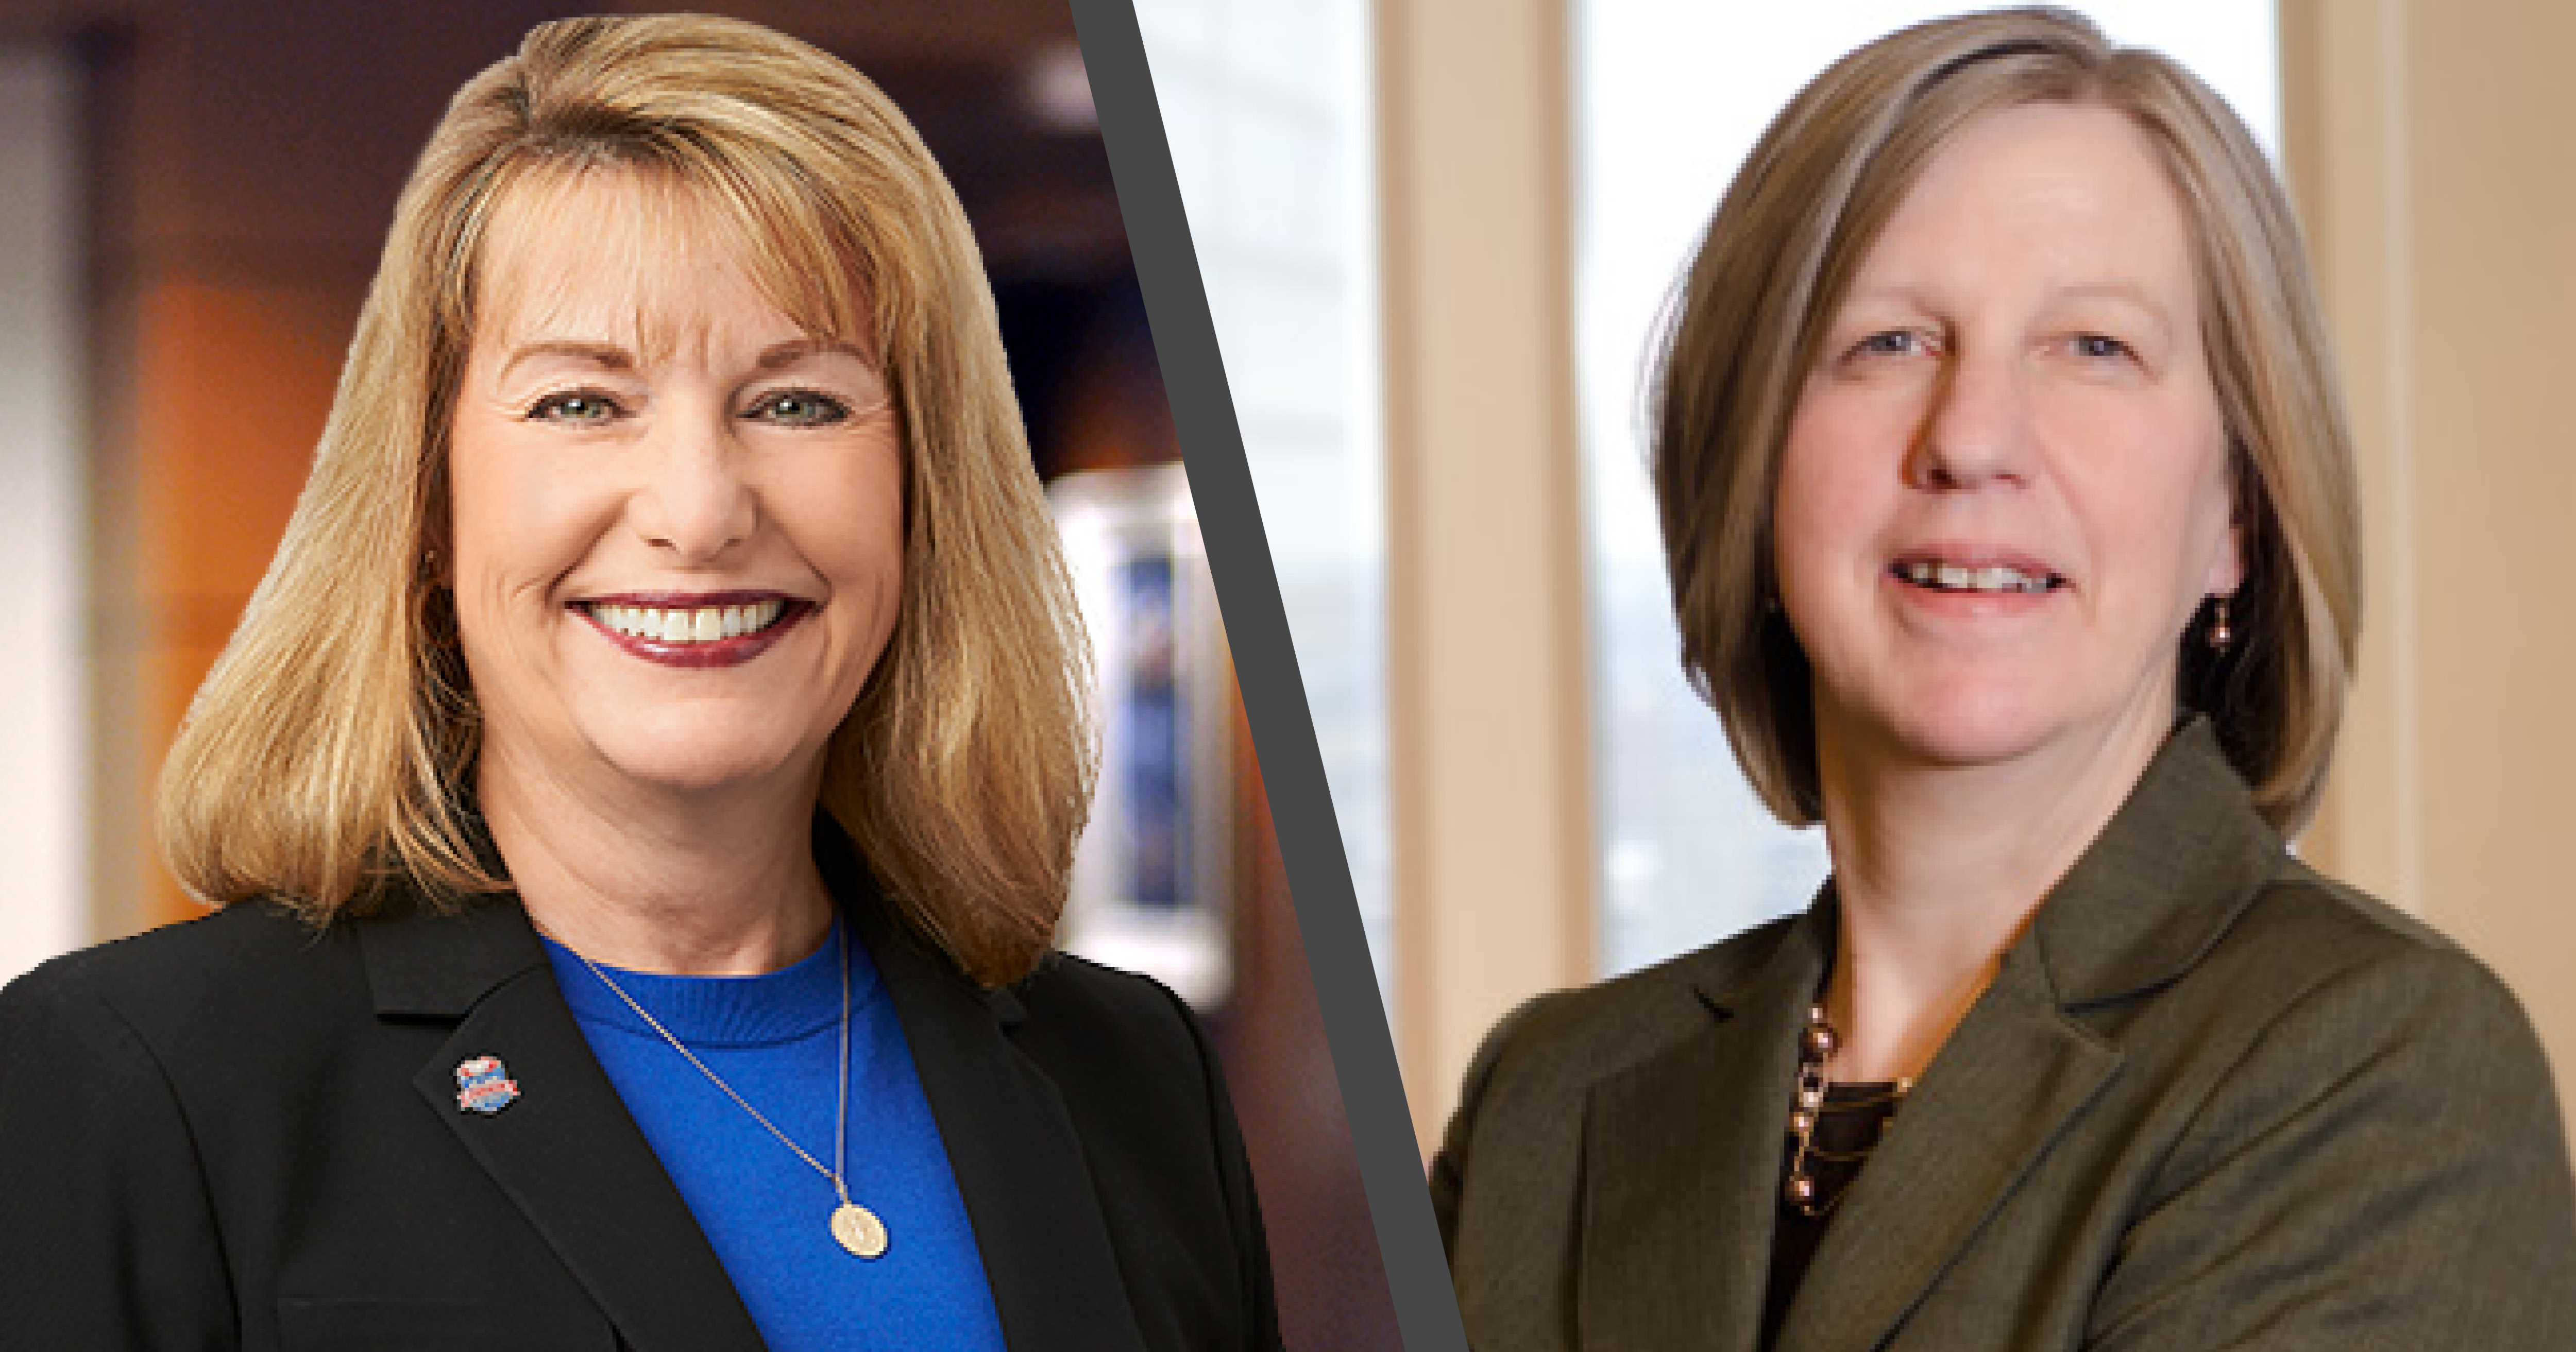 Susan Link and Cindy Costello to Present at Minnesota CLE